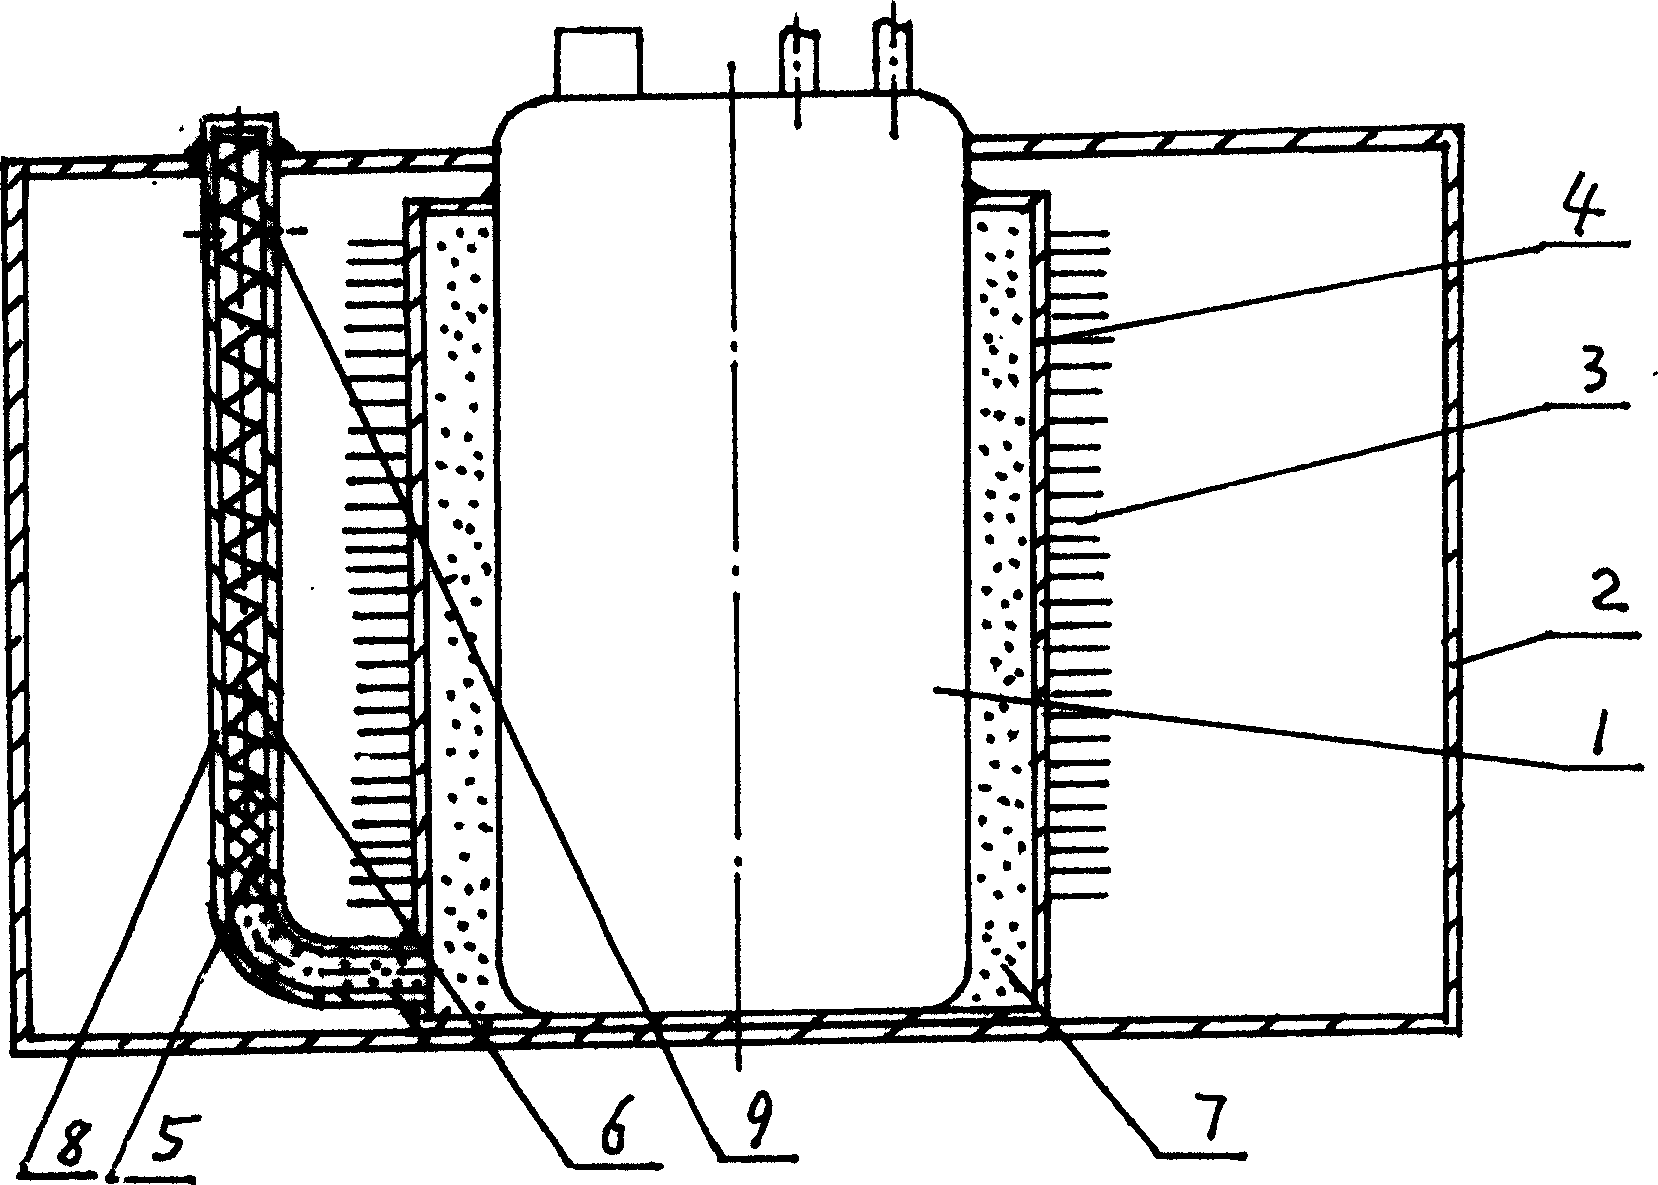 Heating radiator for compressors